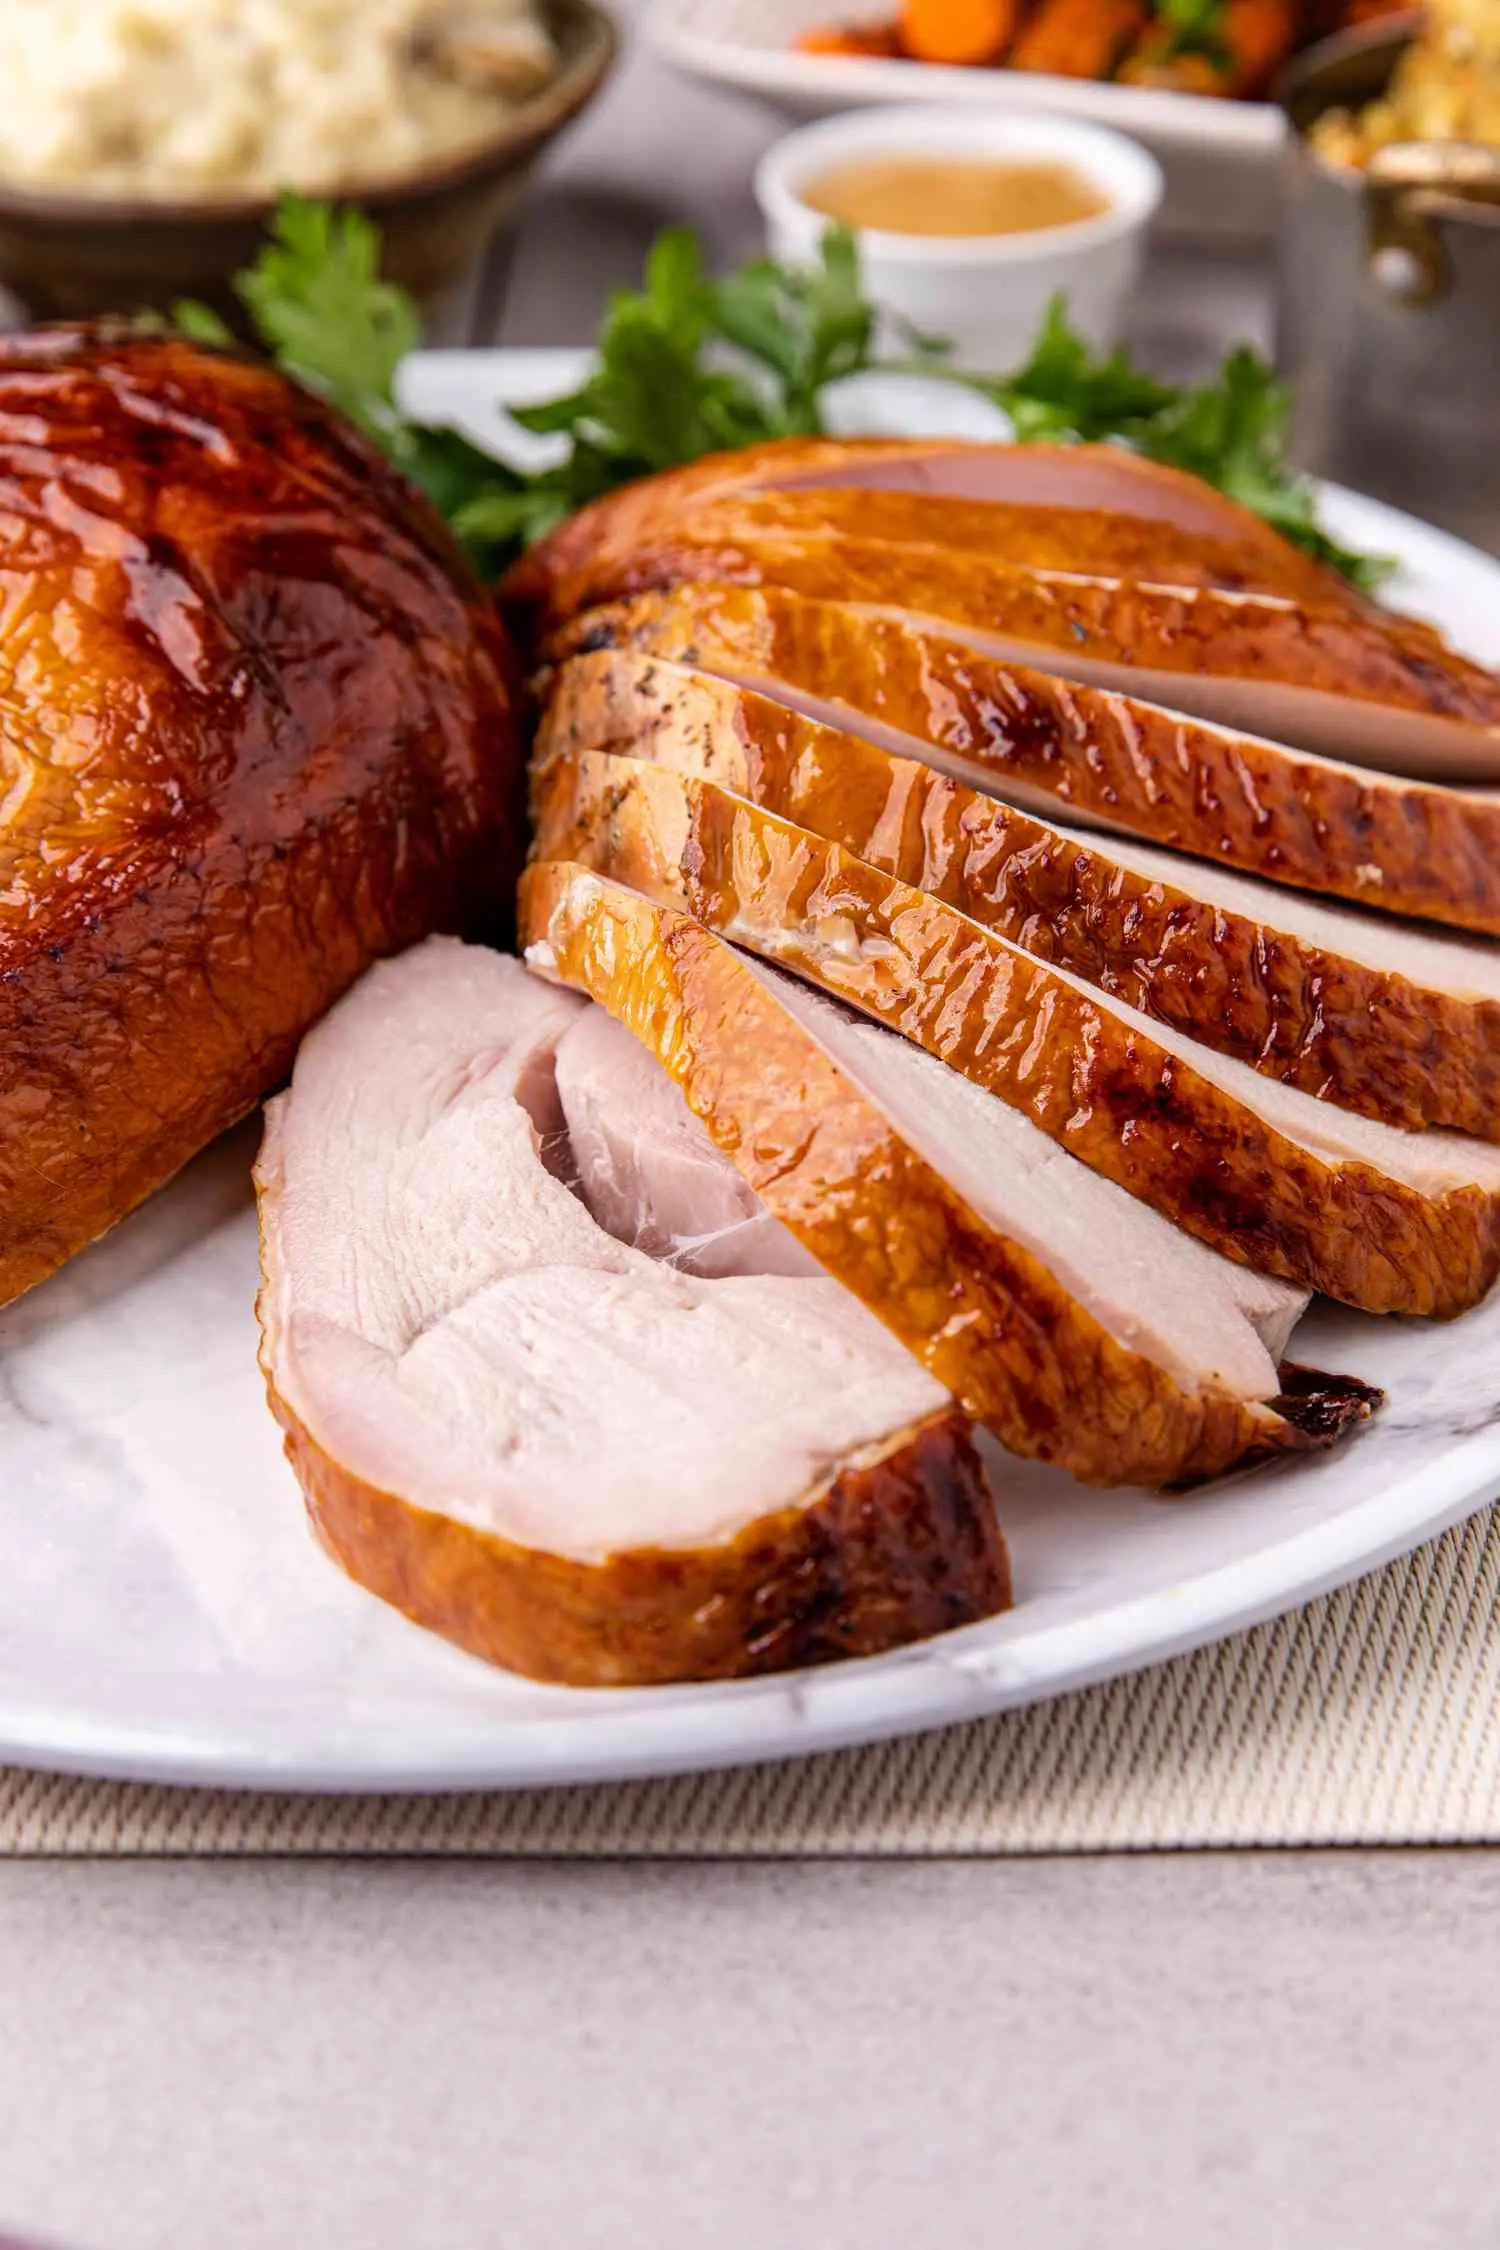 brined and smoked turkey breast - What does brined turkey breast mean